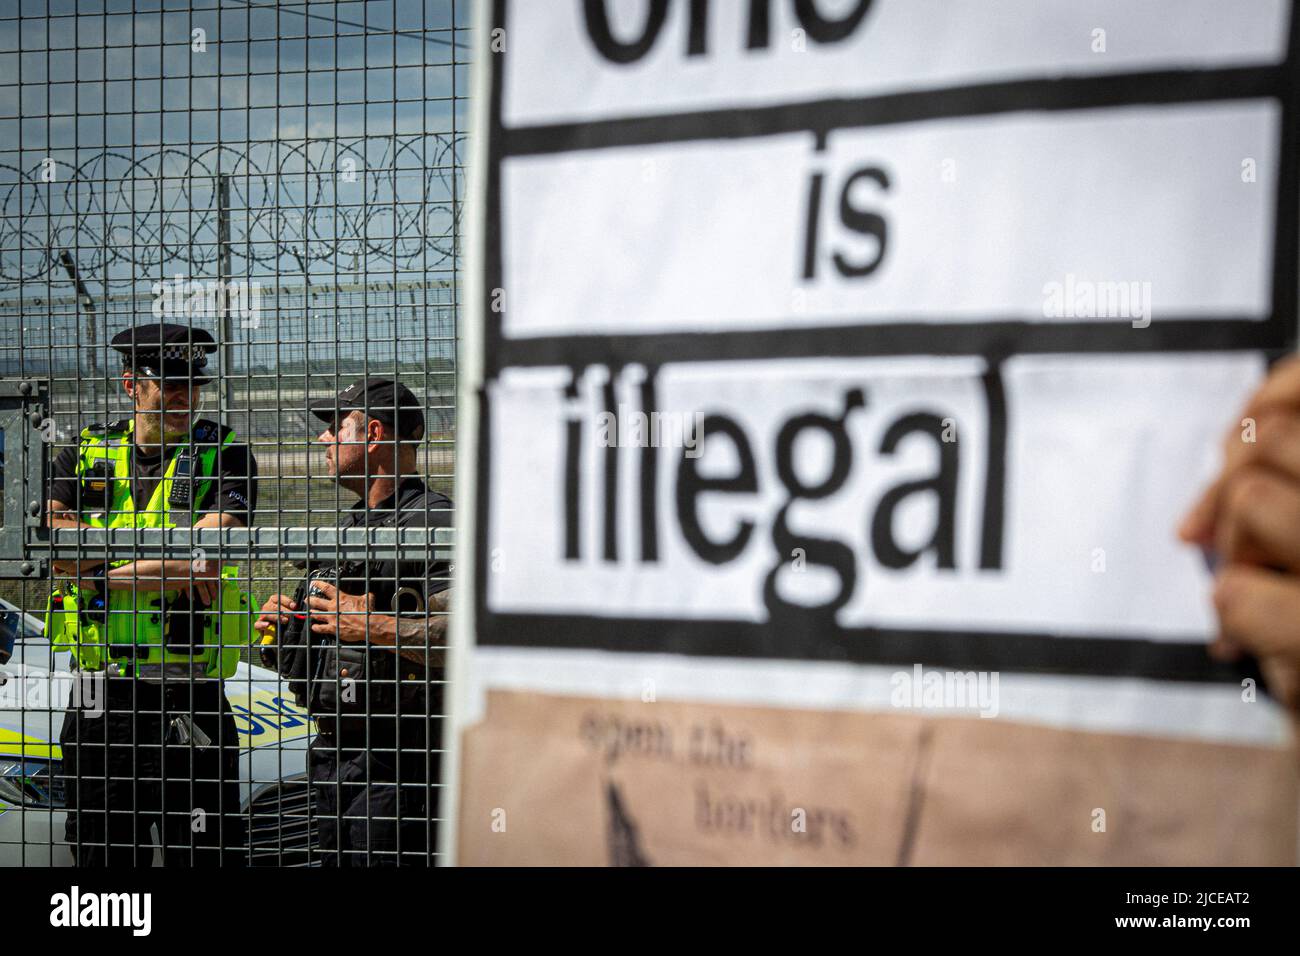 Police stand guard at a road block near Brook House Immigration Removal Centre on June 12, 2022 in London, England. Stock Photo